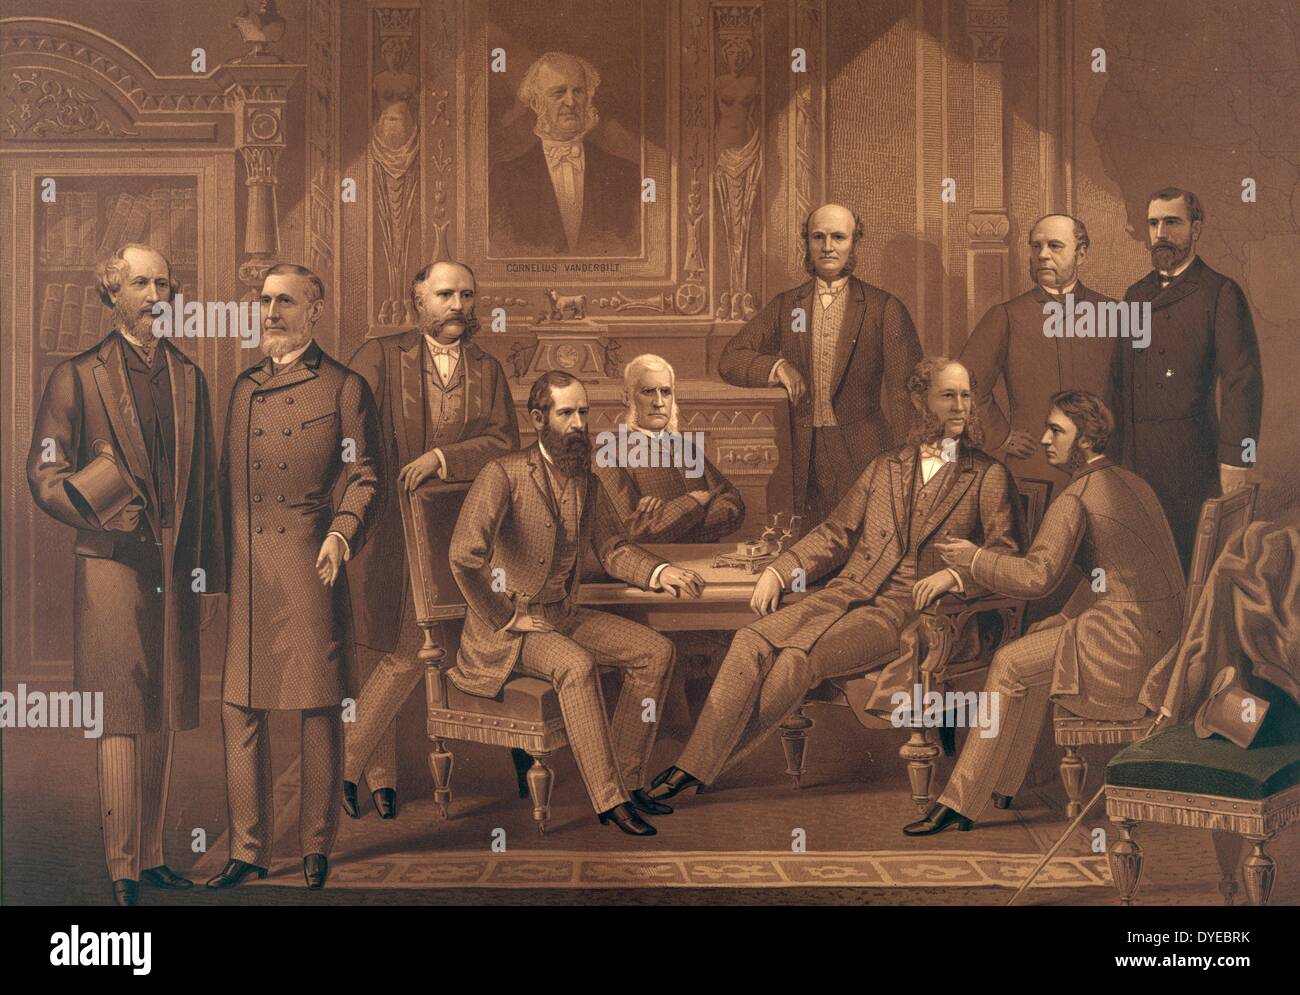 The Kings of Wall Street, left to right: Cyrus Field, Russell Sage, Rufus Hatch, Jay Gould, Sydney Dillon, D.O. Mills, W.H. Vanderbilt, August Belmont, George Ballou, Jas.R. Keene. There is a portrait of Cornelius Vanderbilt on the wall behind the royal court. The Kings of Wall Street was made up of American businessmen and financiers. Stock Photo